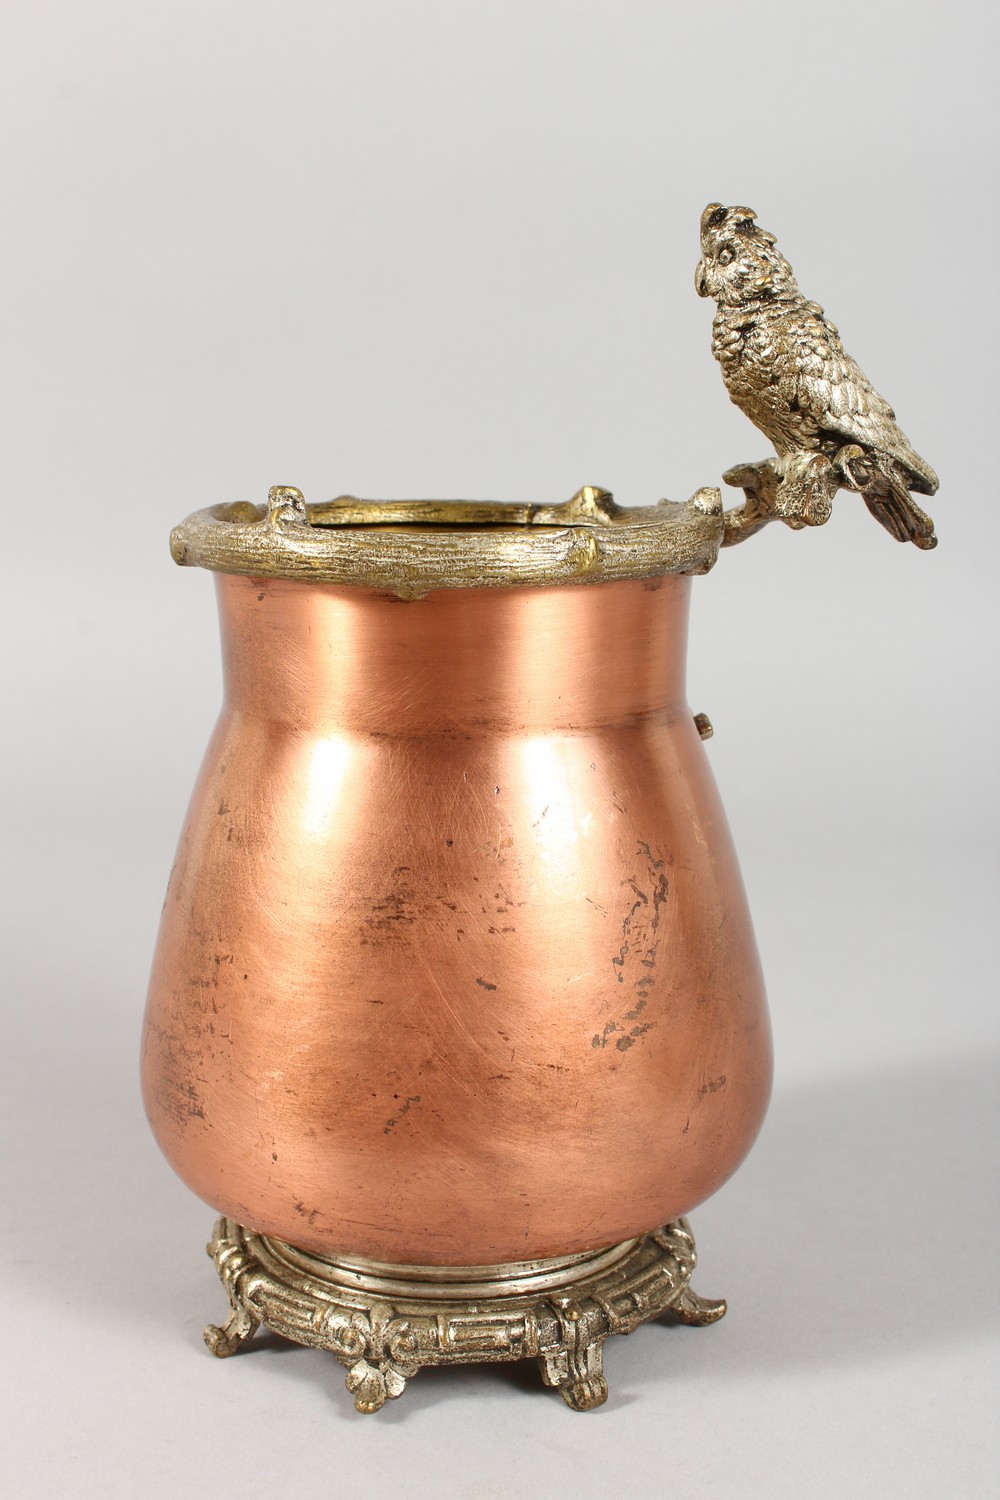 A COPPER VASE, with cast metal mounts, modelled as birds. 8ins high. - Image 5 of 8